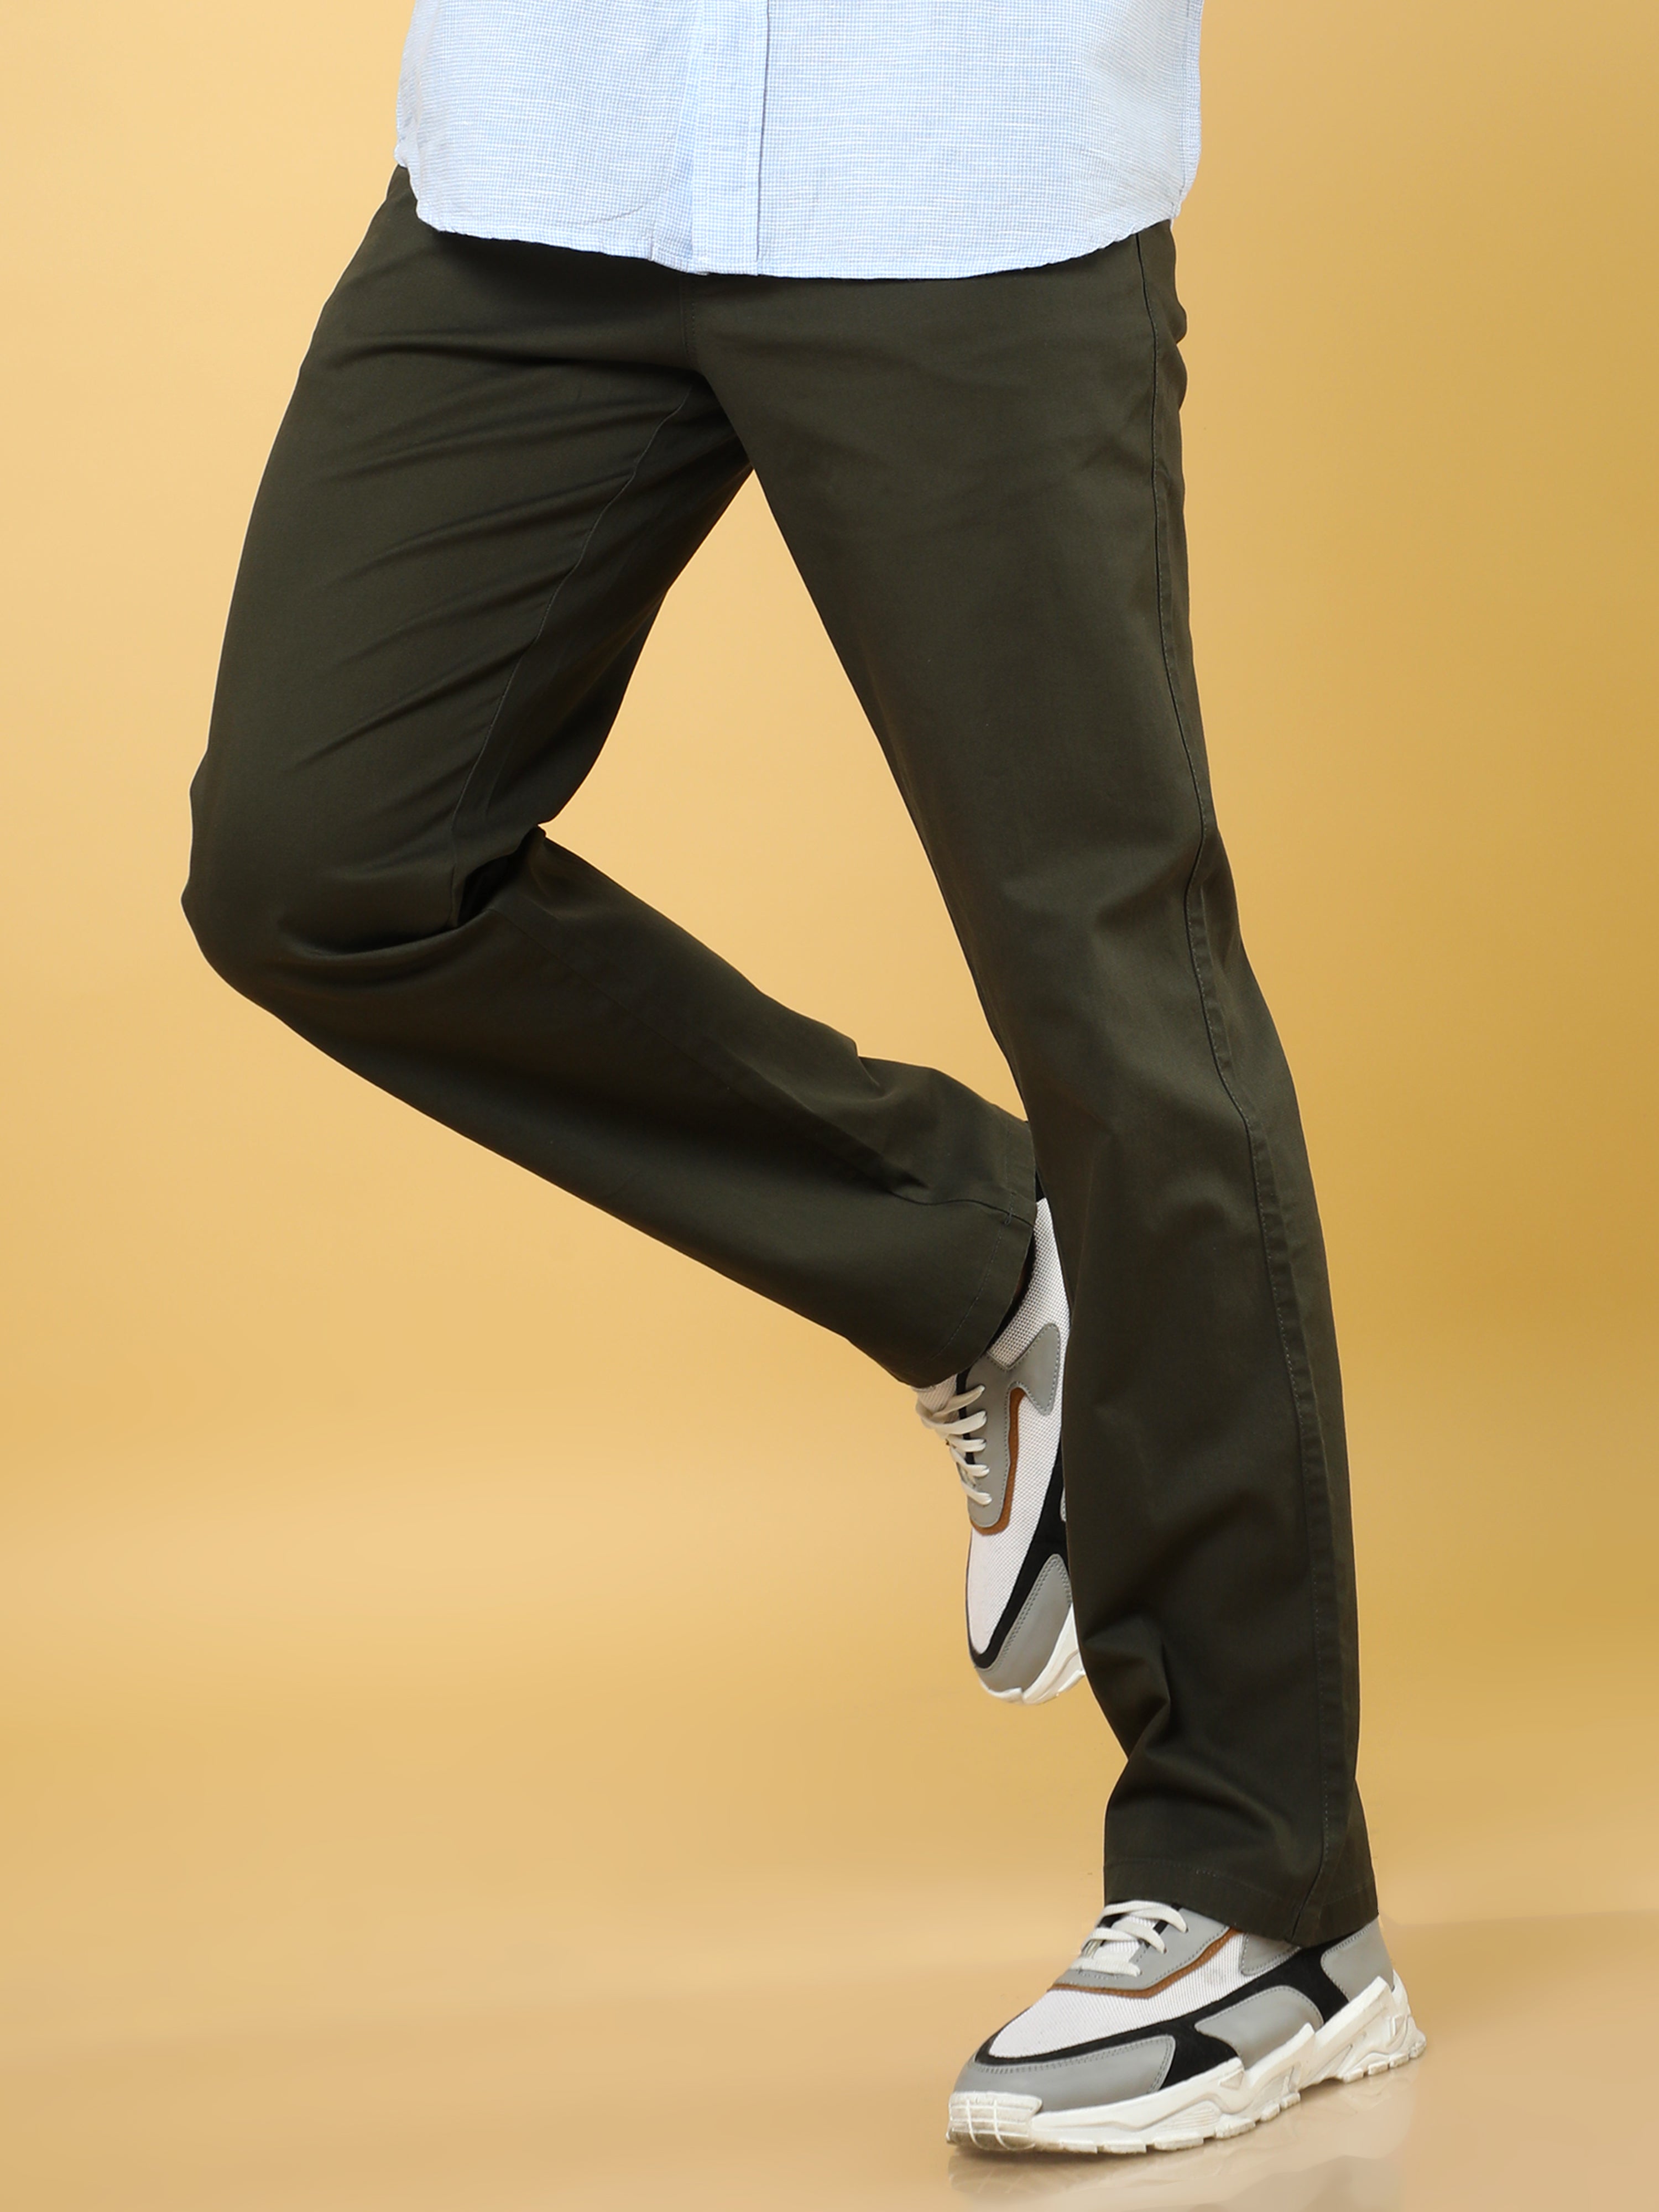 Cotton Dobby Baggy Fit Dark Olive Trouser